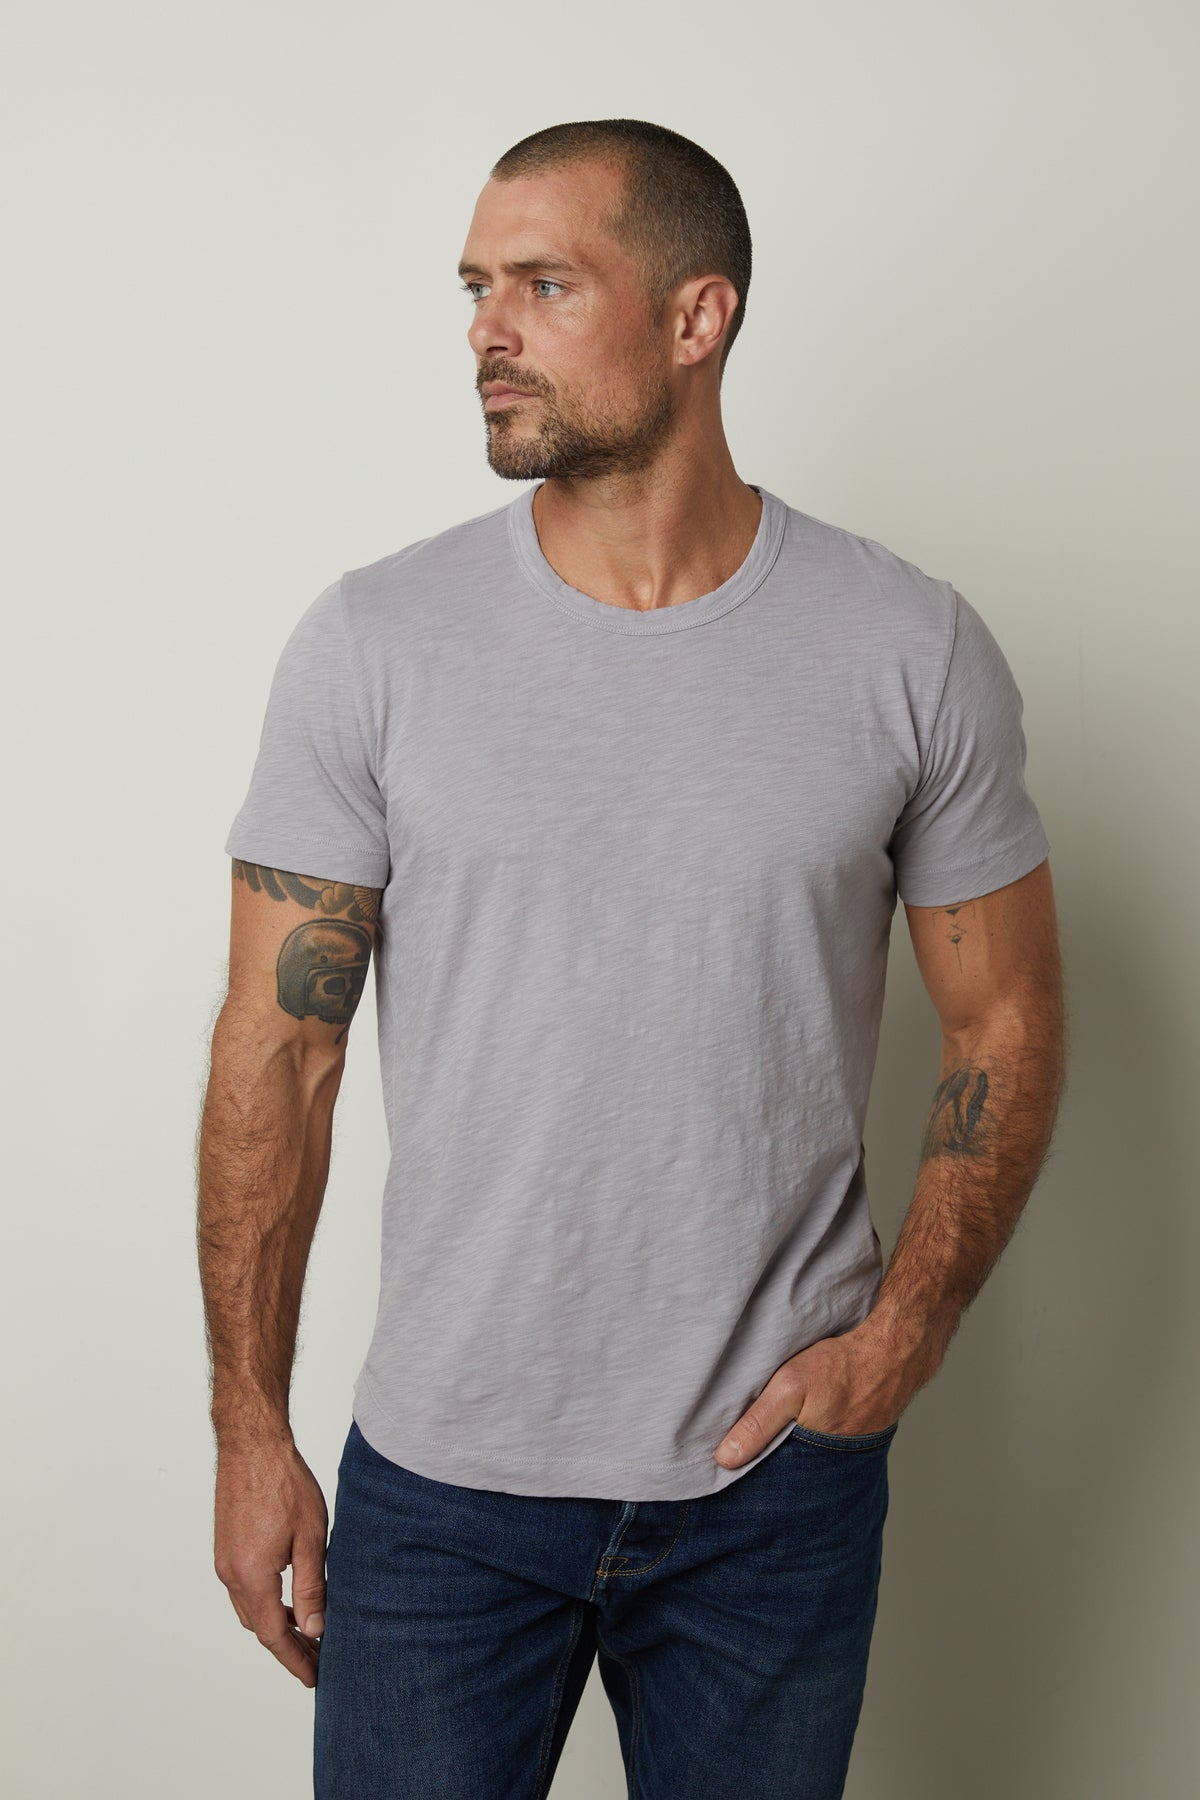 A person with short hair and a beard stands against a plain background, wearing a gray AMARO TEE by Velvet by Graham & Spencer and jeans, resting one hand in their pocket, and displaying tattoos on both arms.-37229768933569